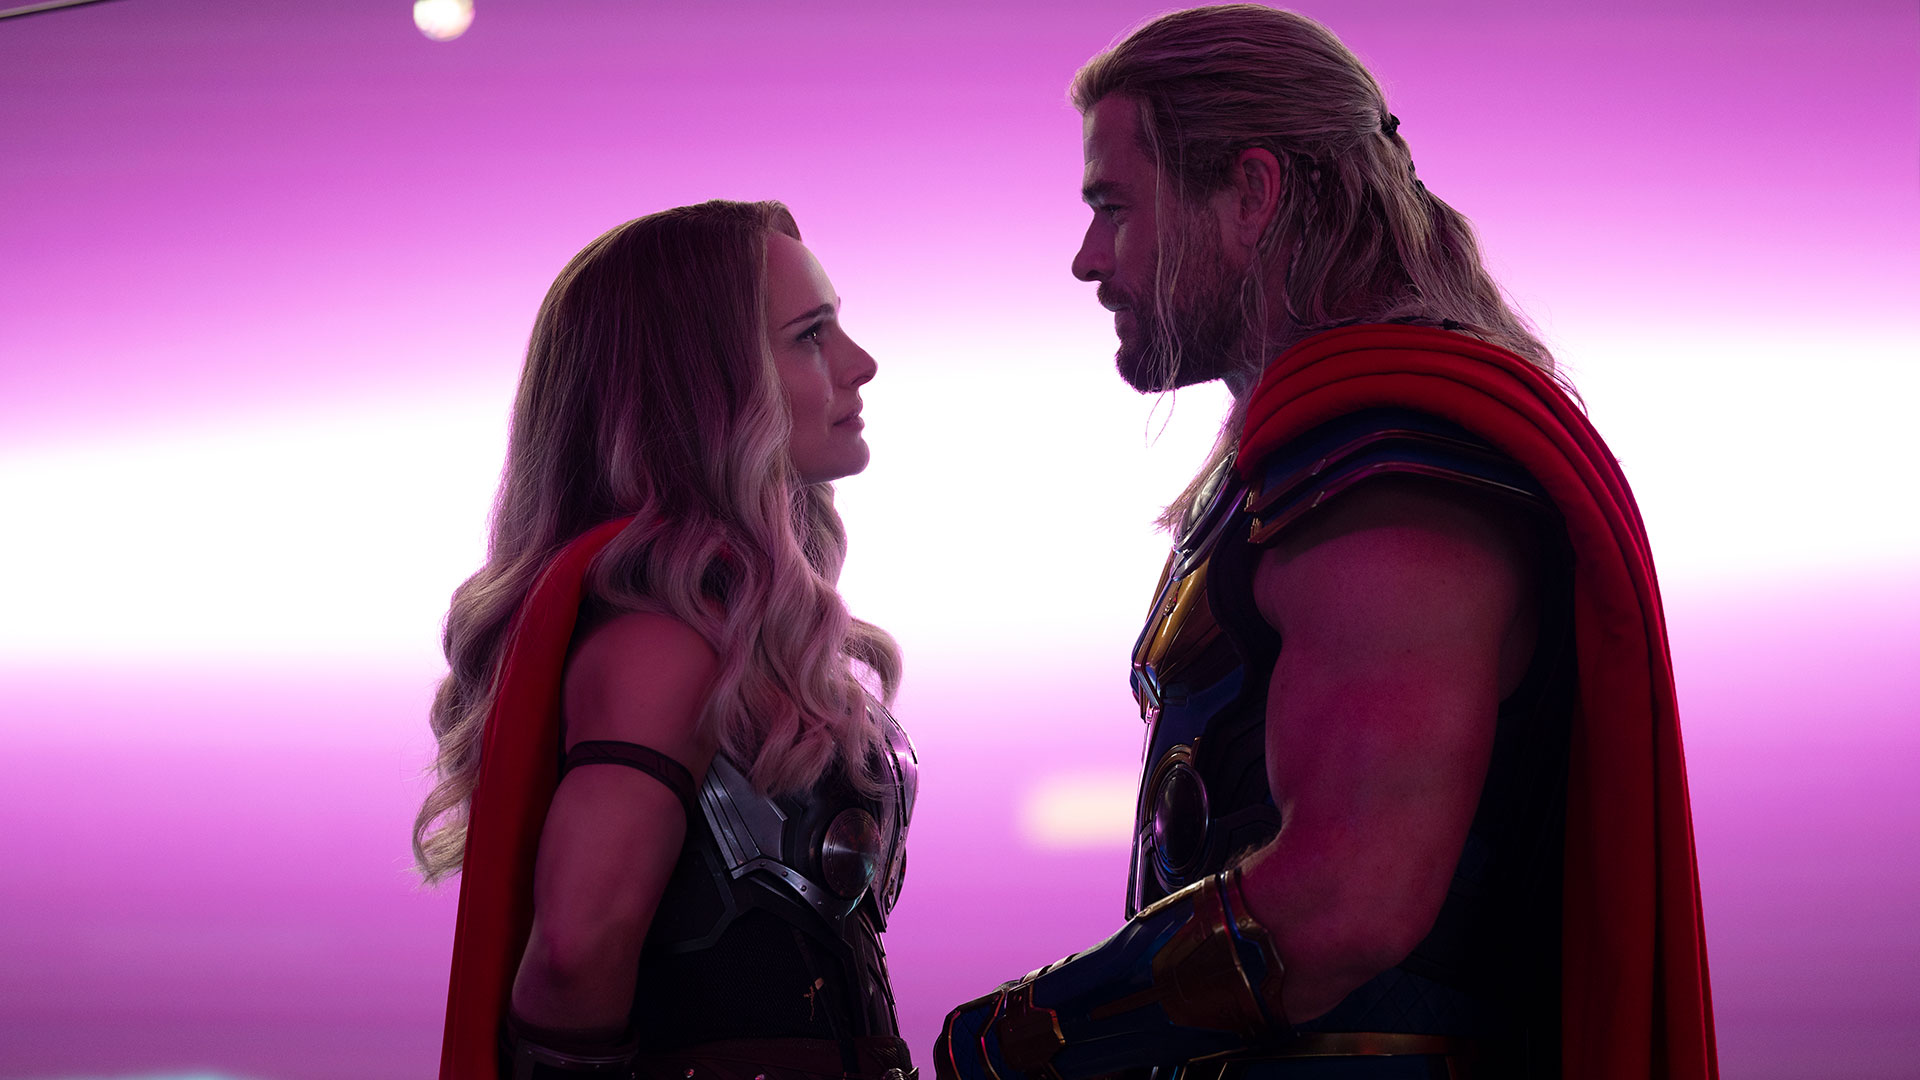 Thor, Jane and the Guardians rock up in these exclusive Love and Thunder image